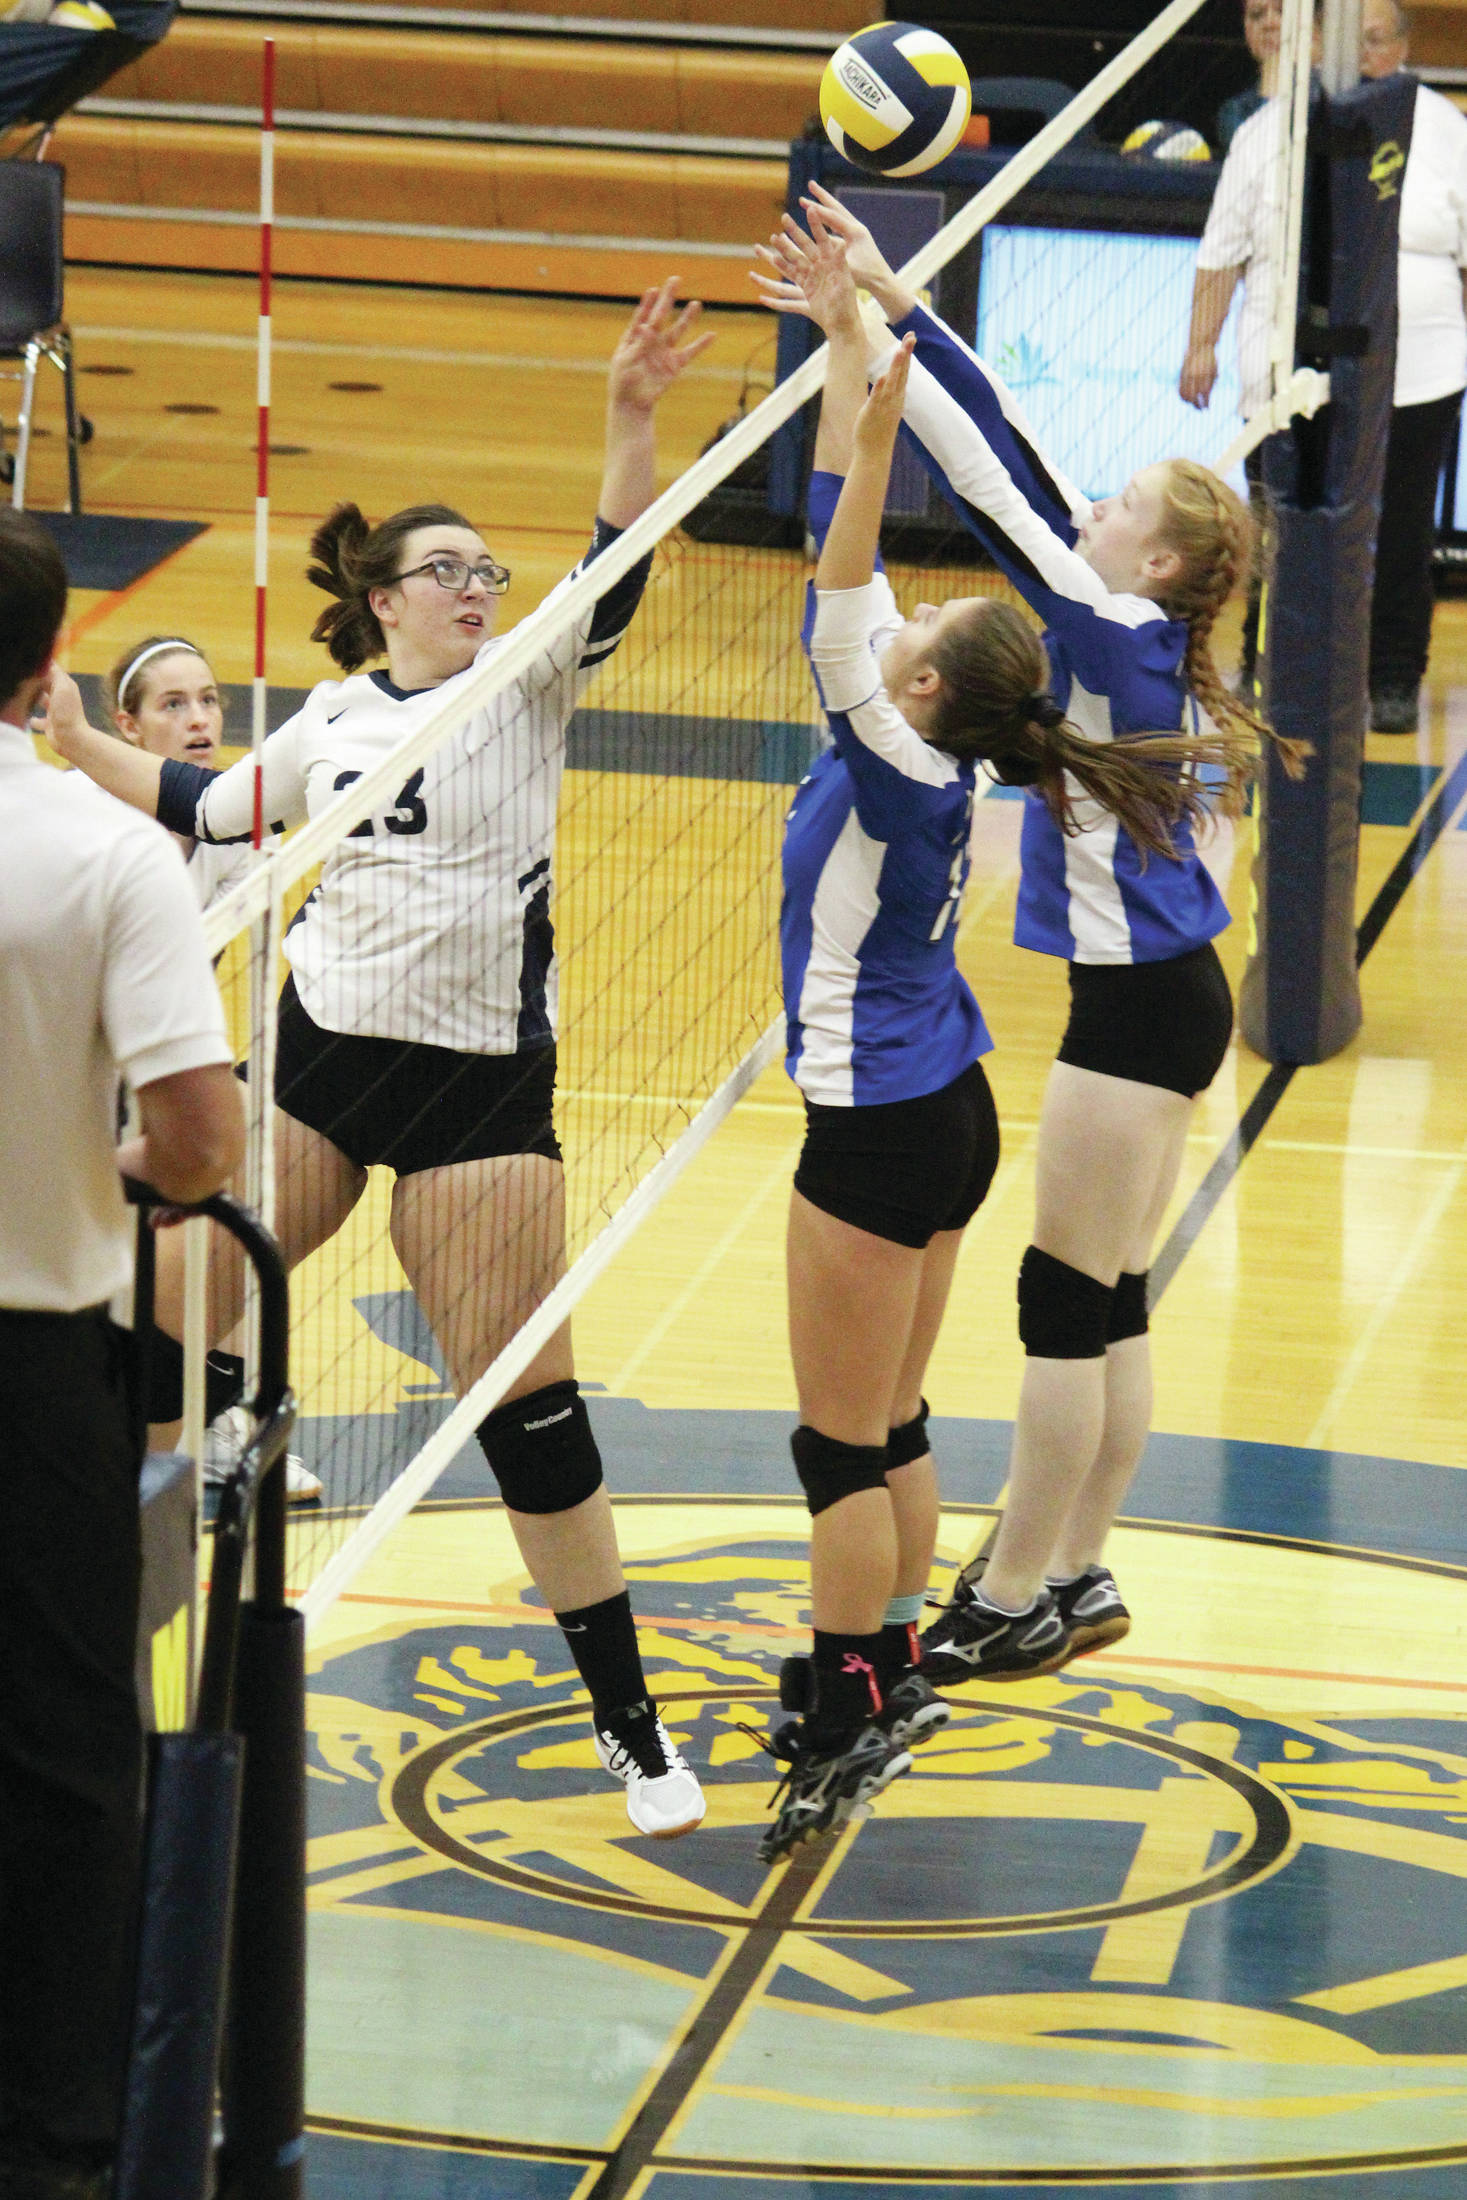 Palmer’s Kristen Beames (center) and Carli Bowen (right) jump to block a tip from Homer’s Tonda Smude during a Thursday, Sept. 12, 2019 volleyball game in the Alice Witte Gymnasium in Homer, Alaska. (Photo by Megan Pacer/Homer News)